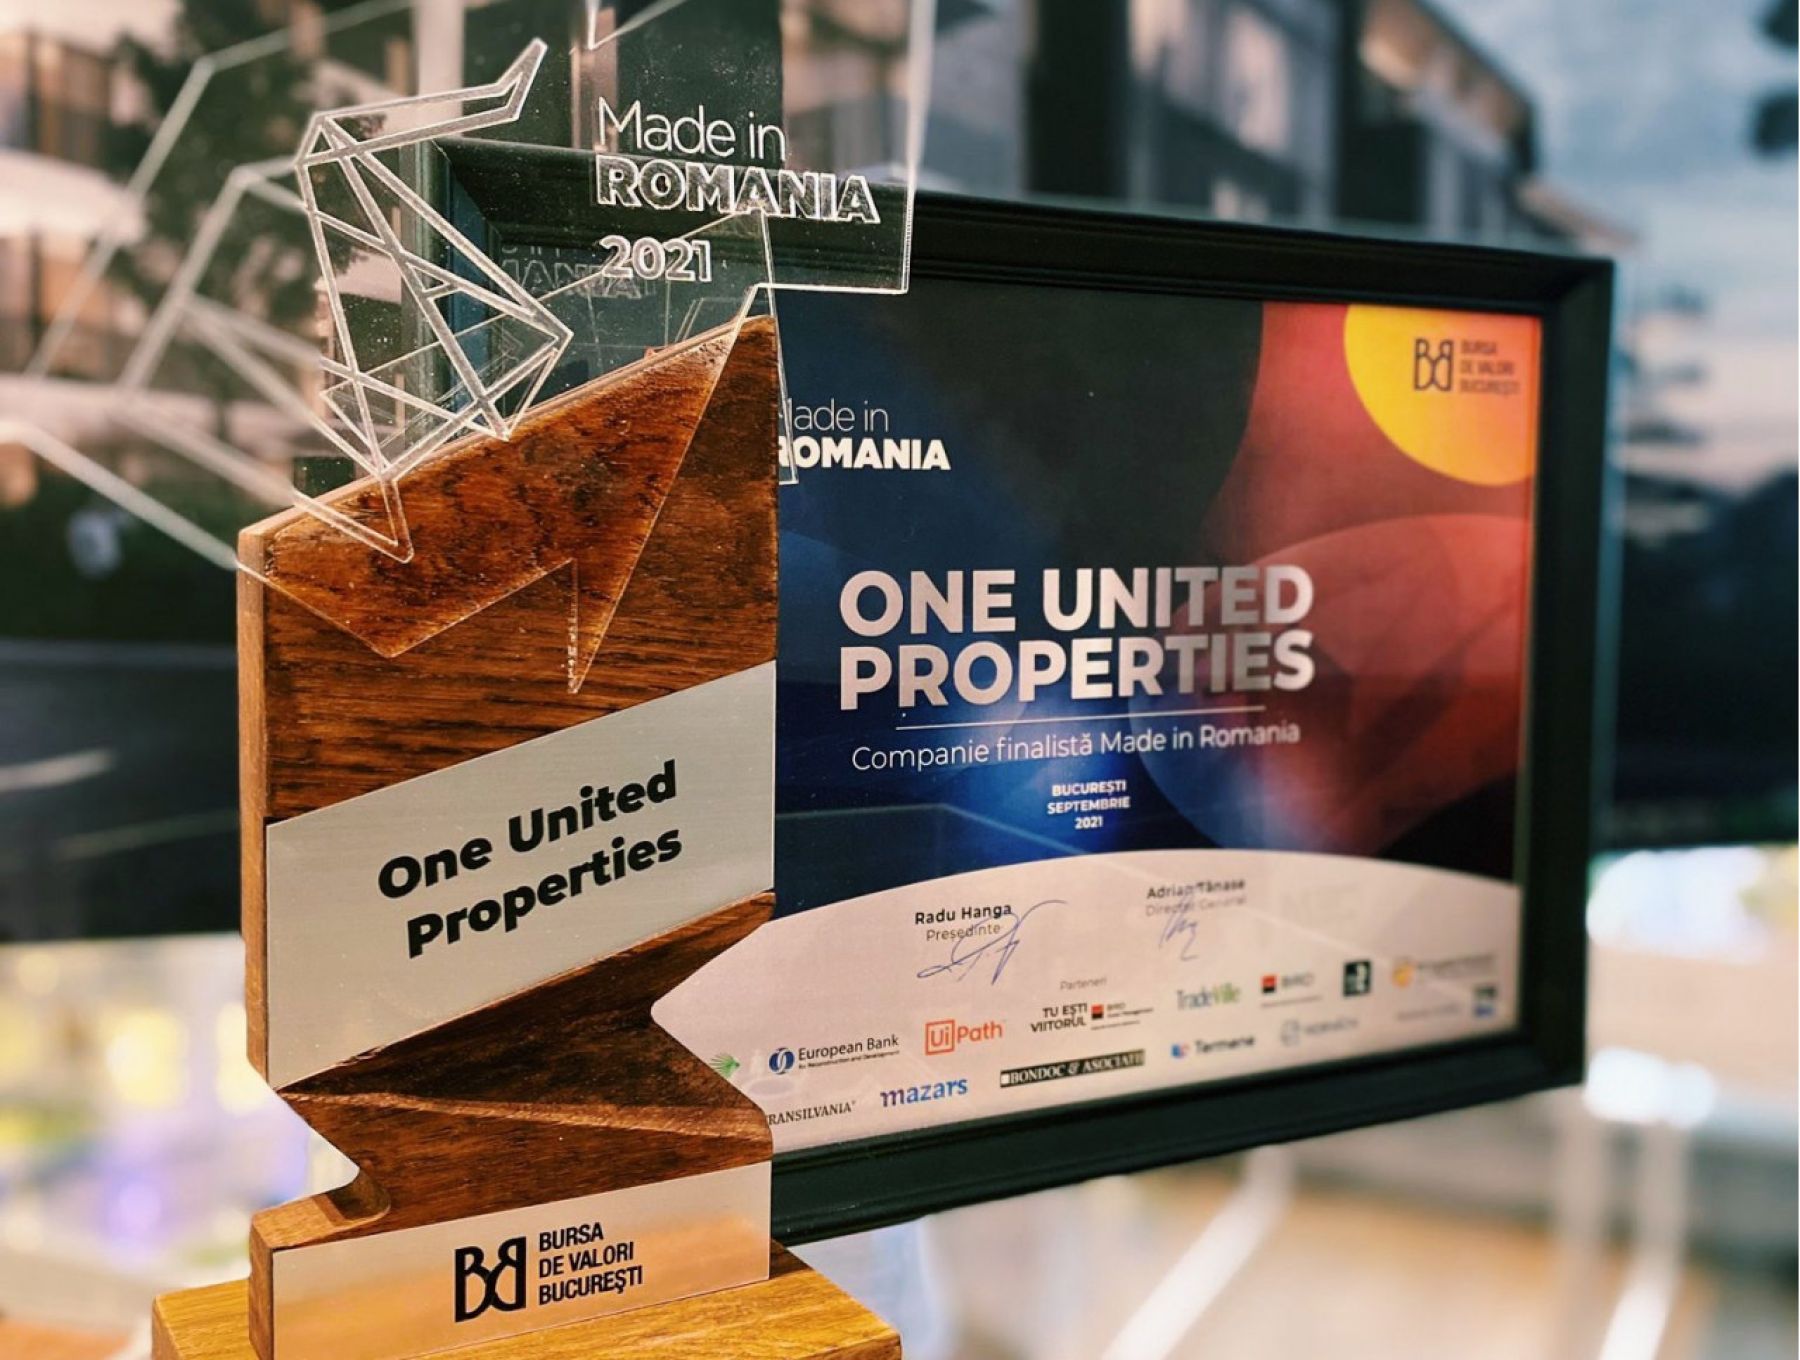 One United Properties was awarded at Made in Romania gala by Bucharest Stock Exchange (BVB).